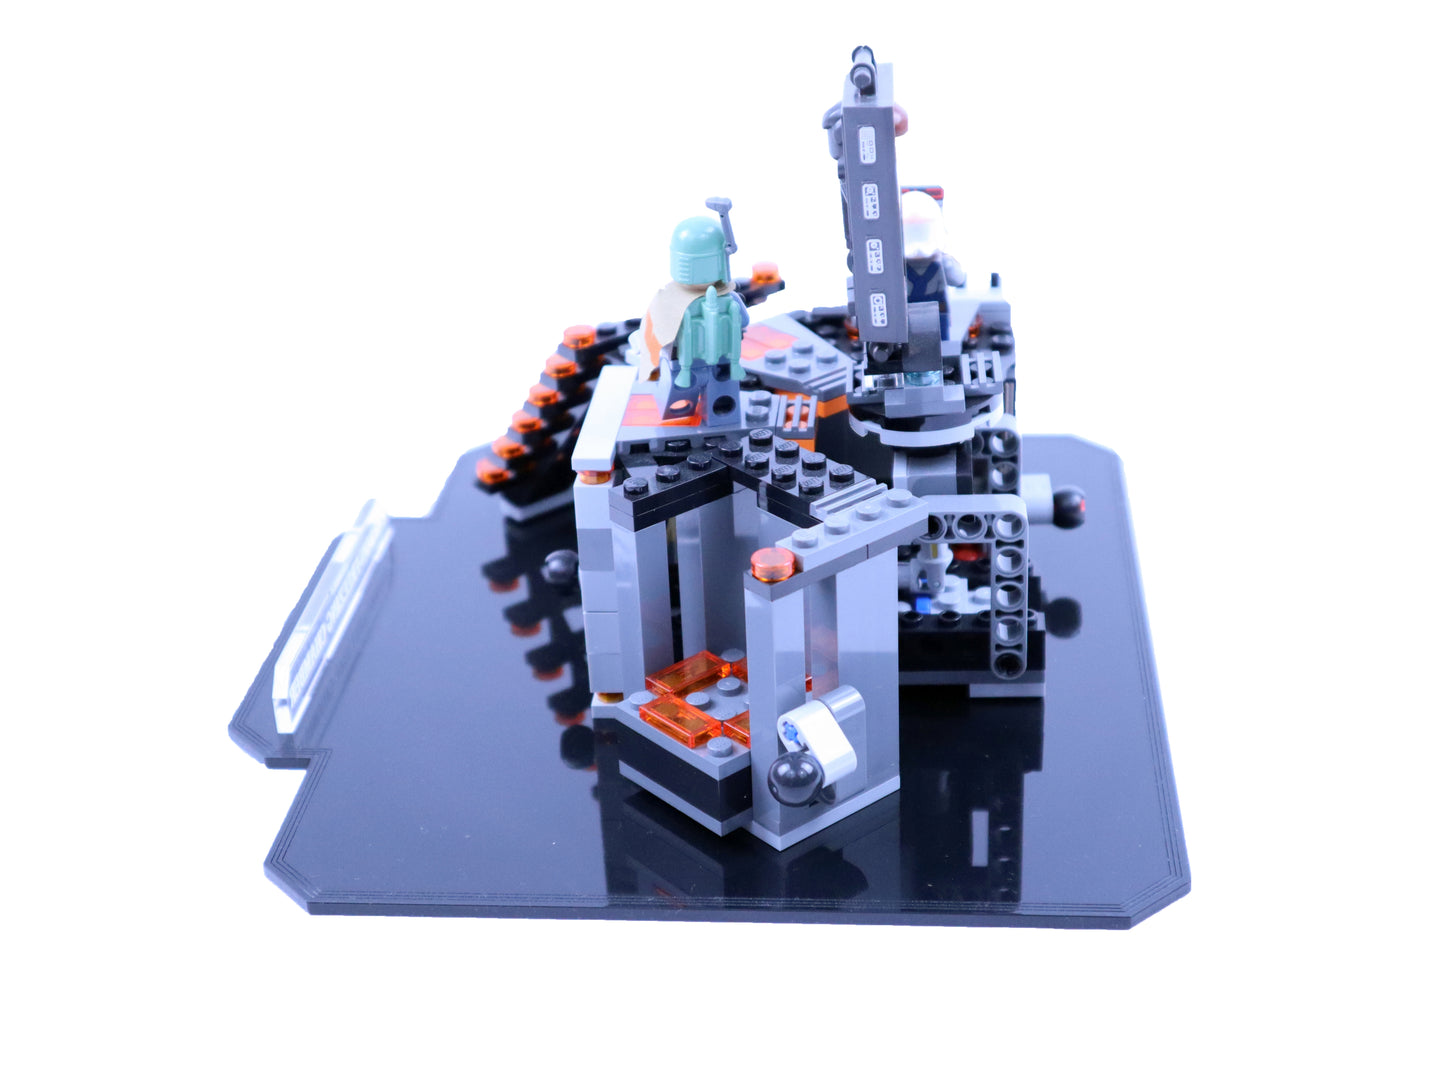 Carbon Freezing Chamber Diorama (75137) Display Stand